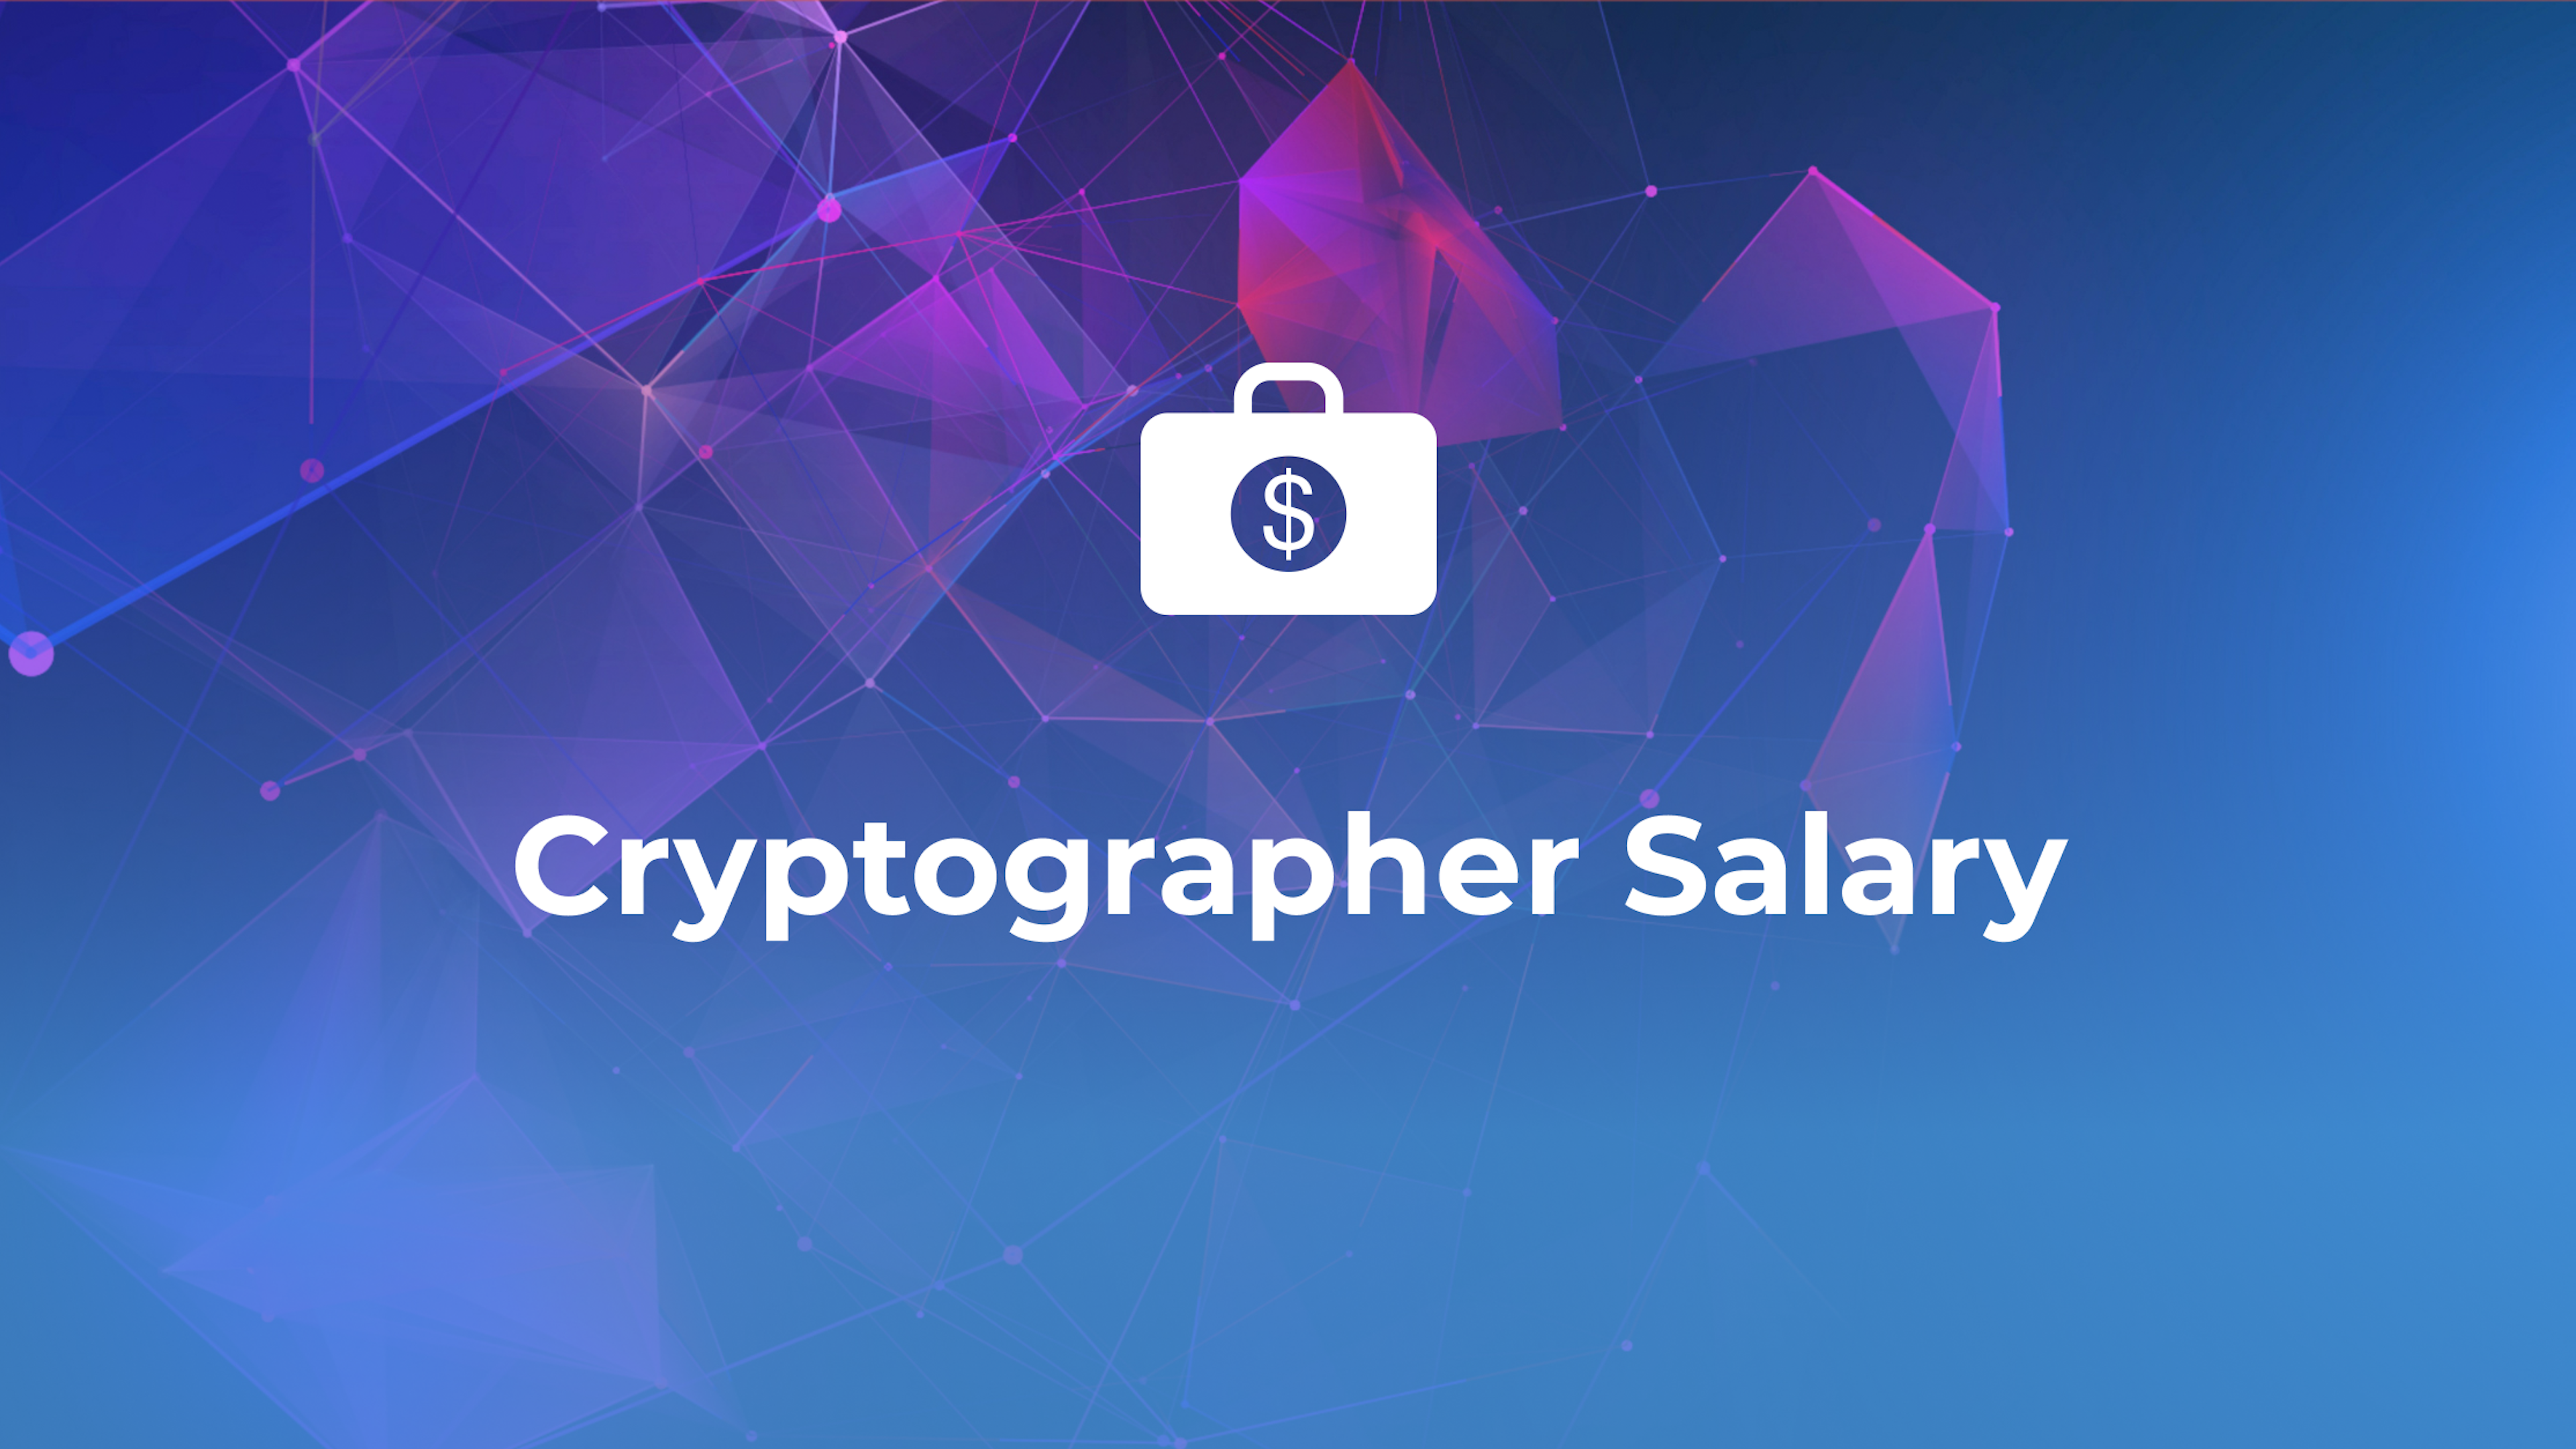 Cryptographer Salary | Everything You Need to Know About It